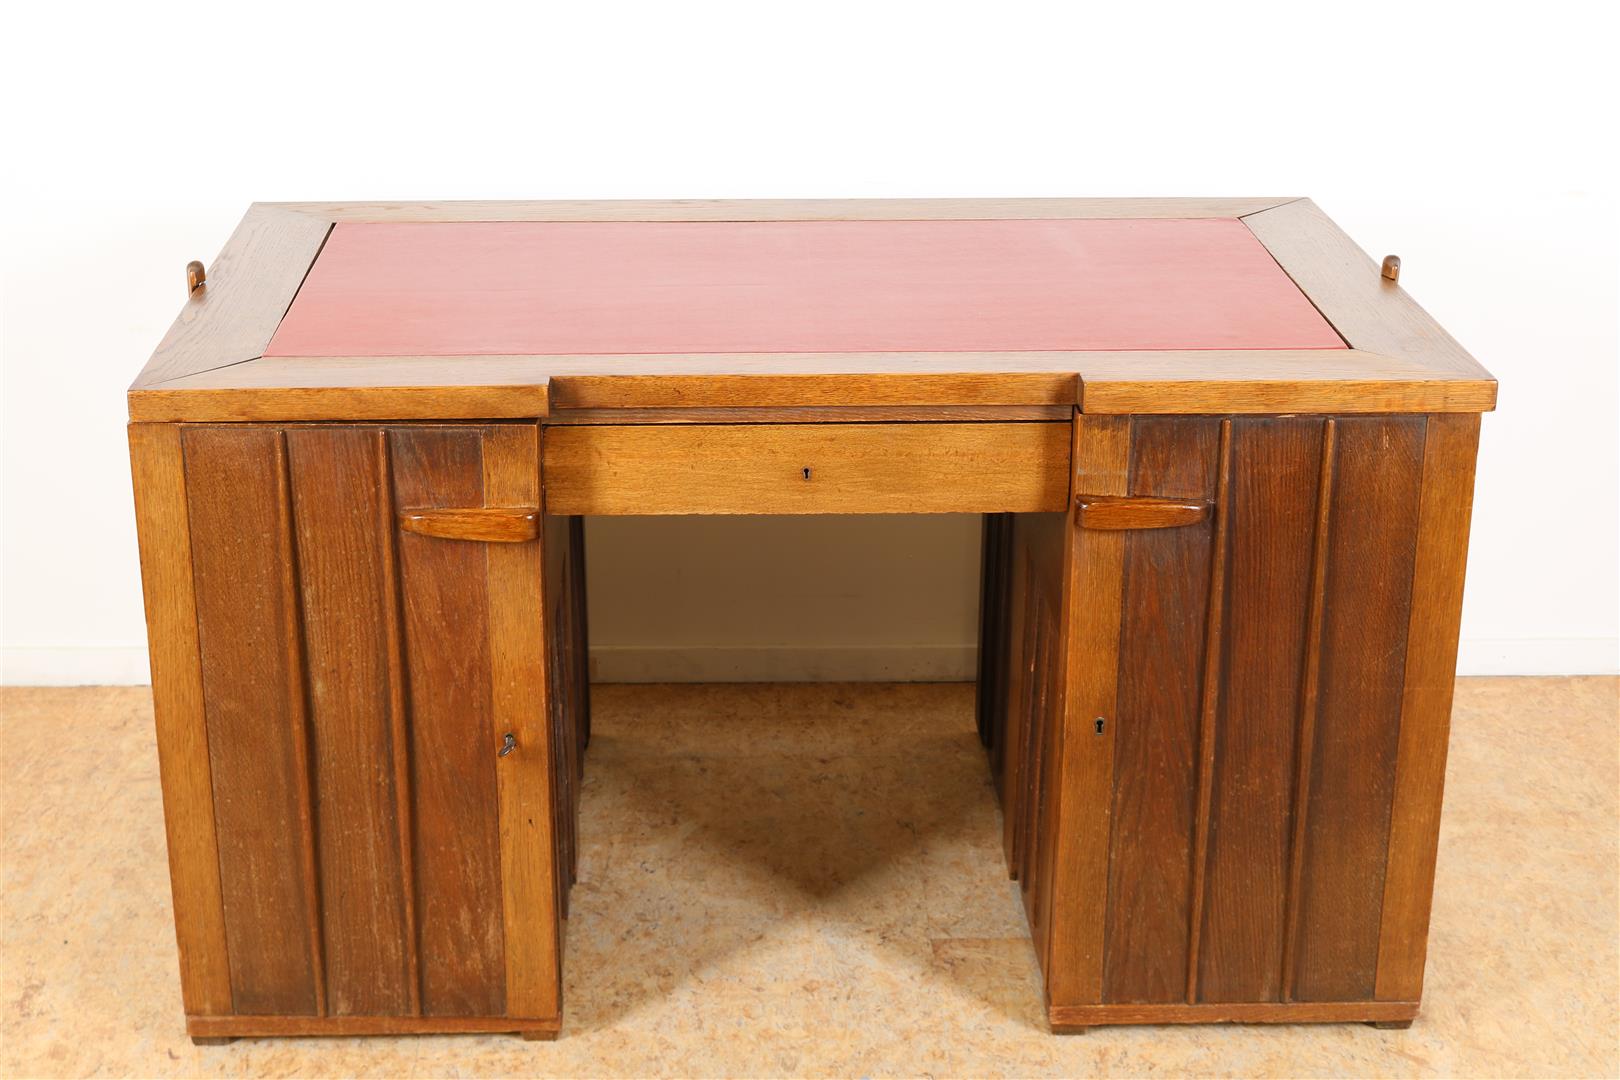 Oak Amsterdam school desk with red leather top, plinth drawer and 2 panel doors and interior with